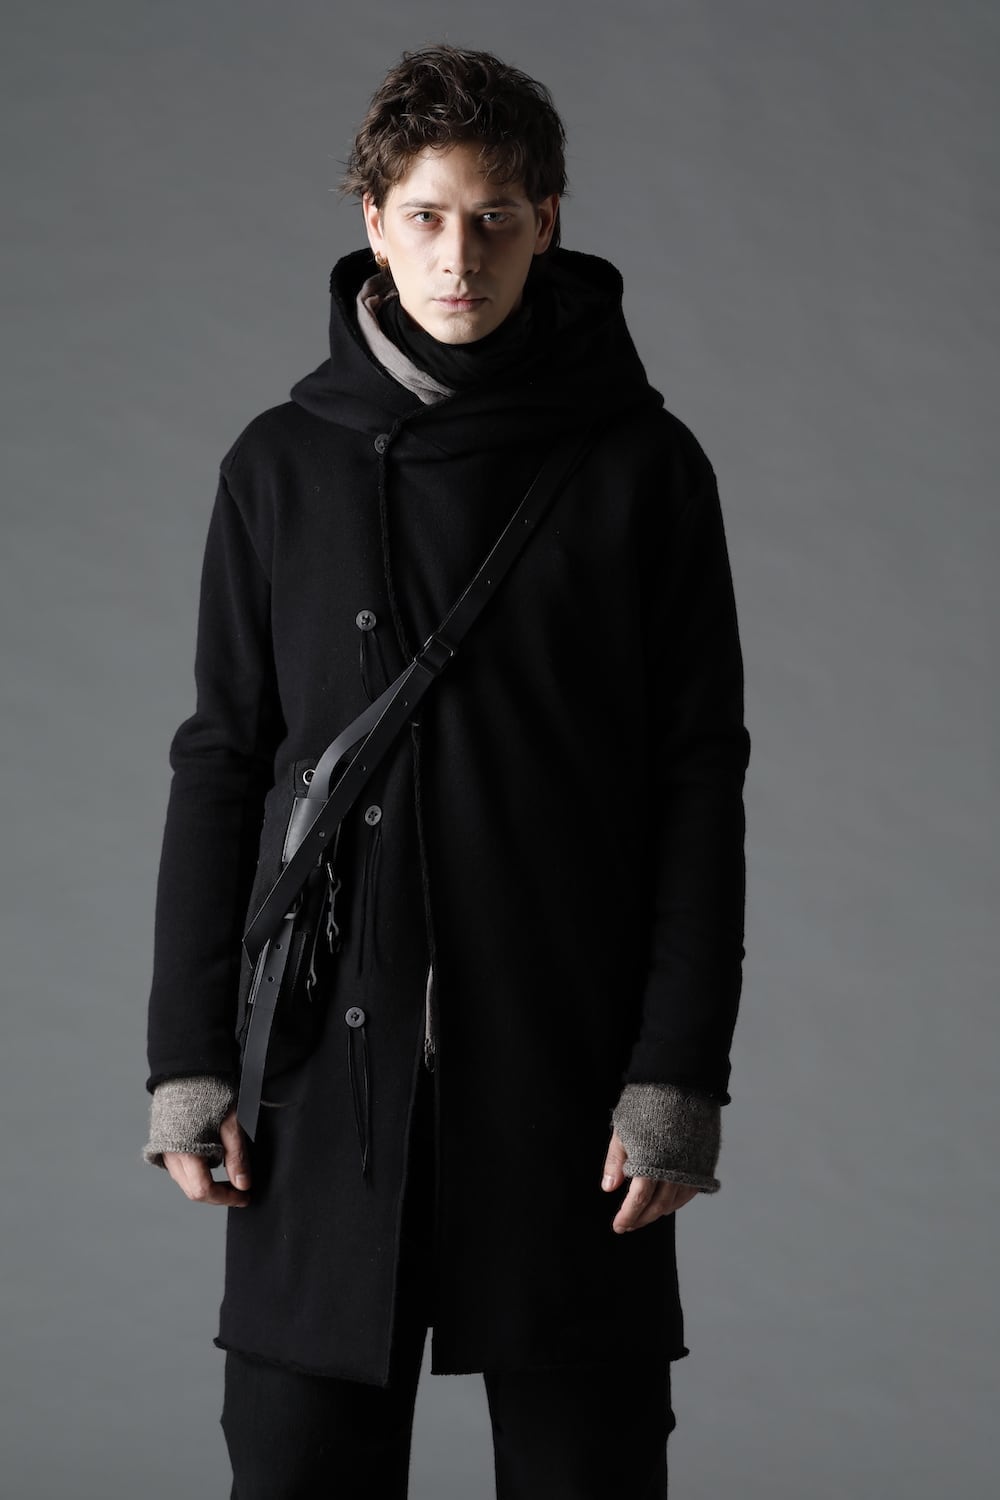 STA   Cashmere x Wool x Cotton Pique Fleece Lined Hooded